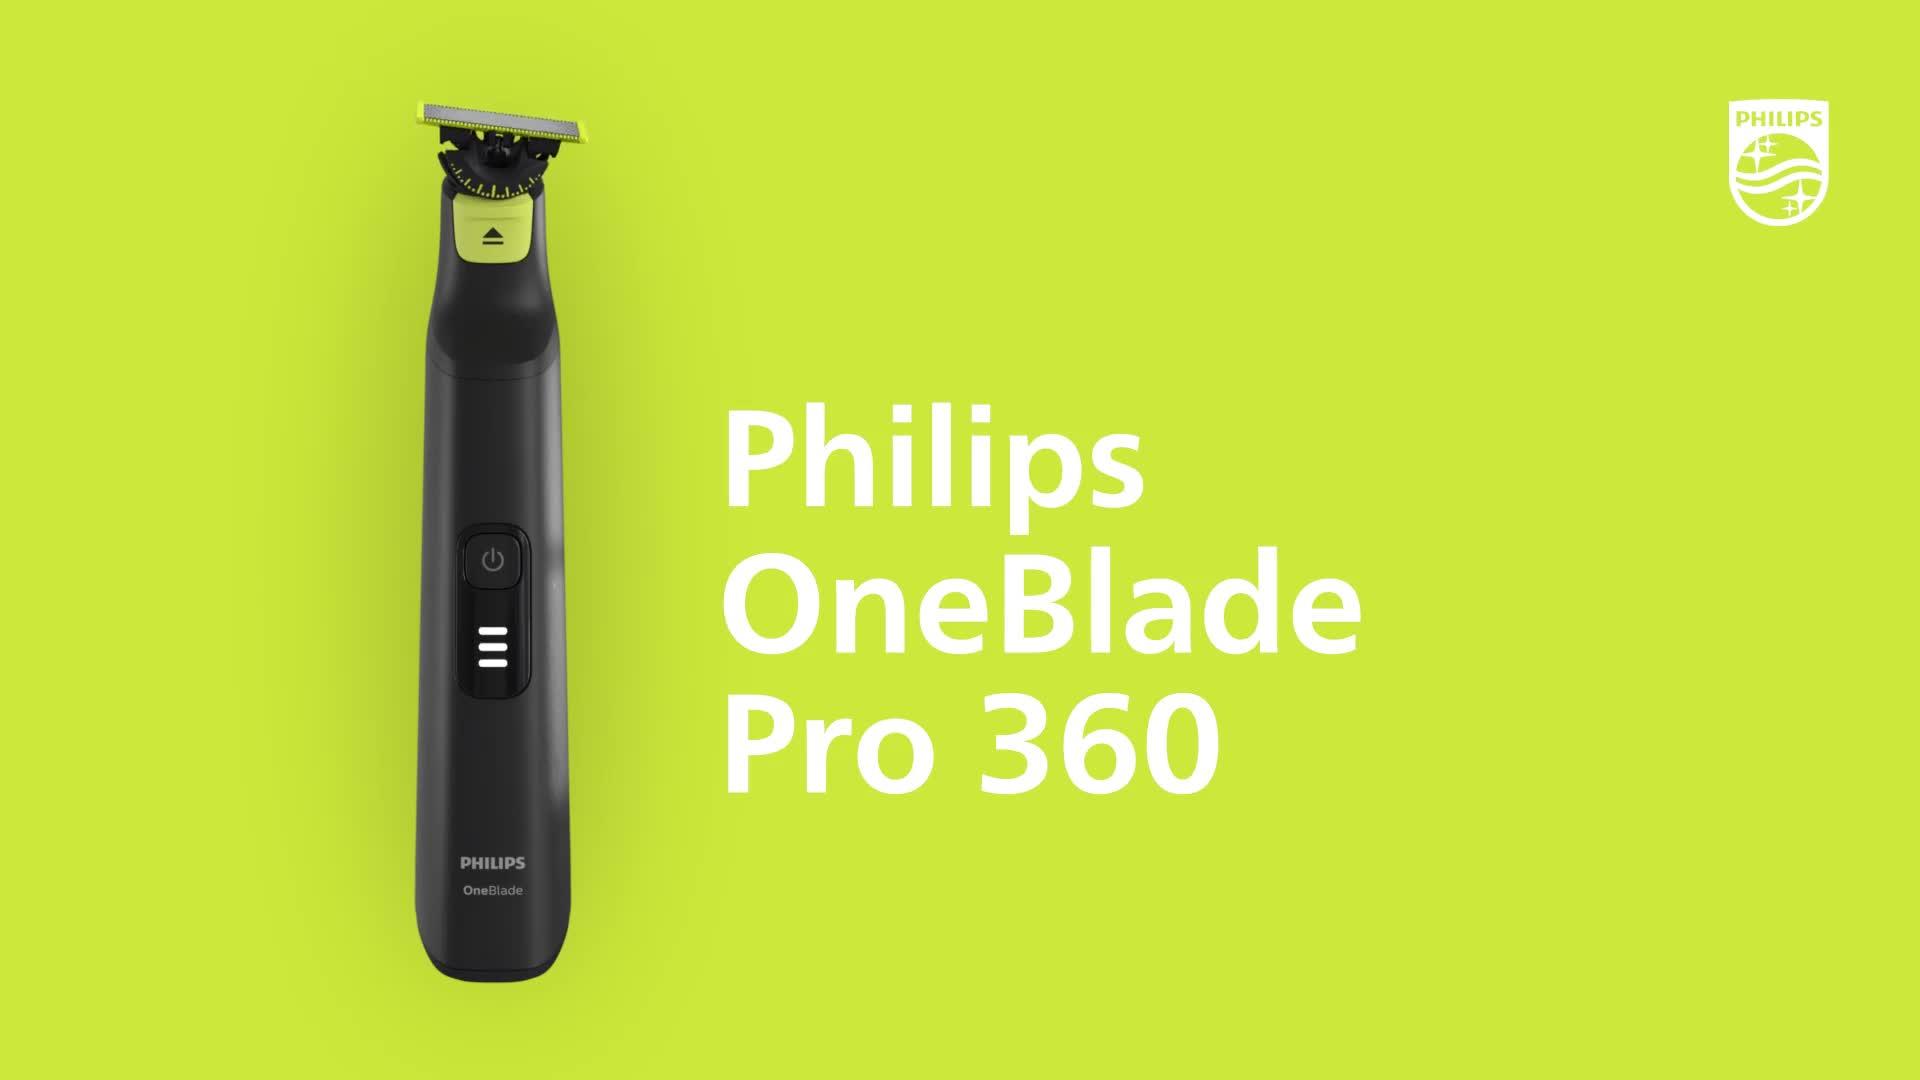 Philips OneBlade Pro 360 for Face & Body with 14-in-1 Adjustable Comb-  Trim, Edge, Shave, QP6541/15